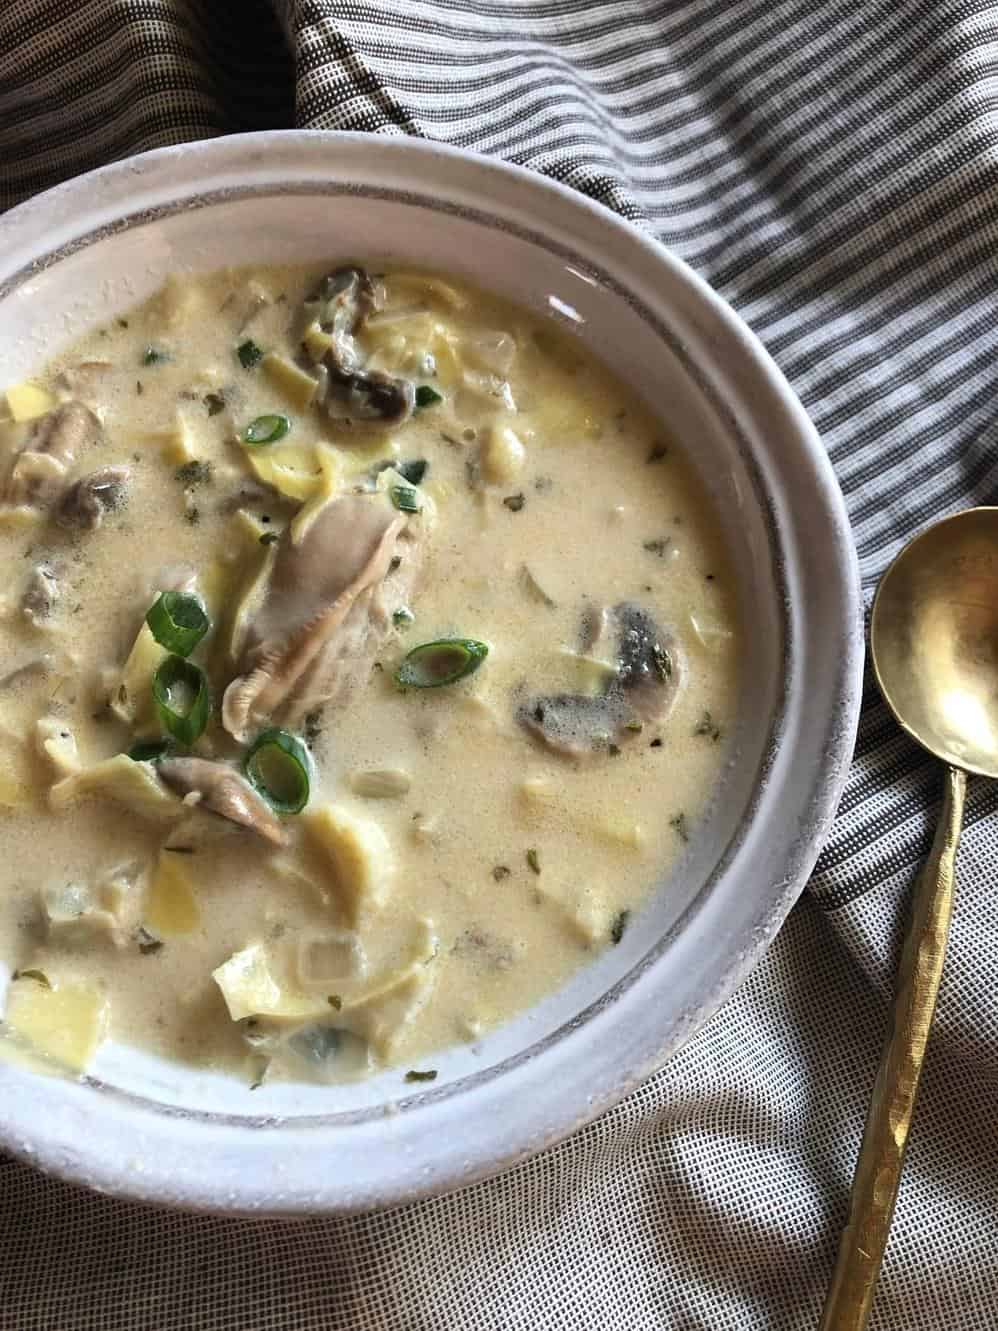  Warm your heart with this creamy and savory soup.